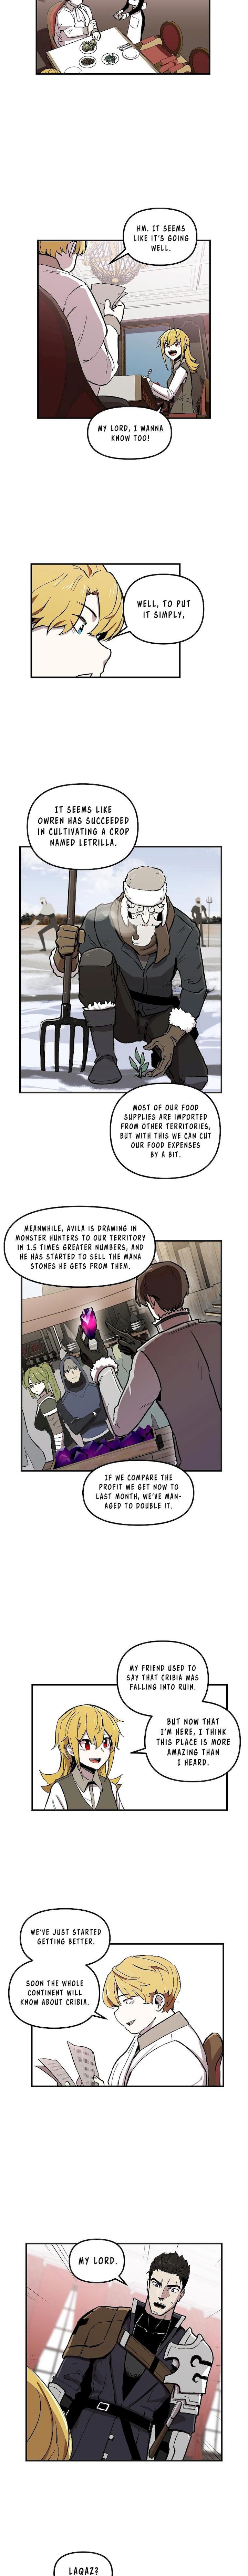 Solo Bug Player - Chapter 7 Page 5